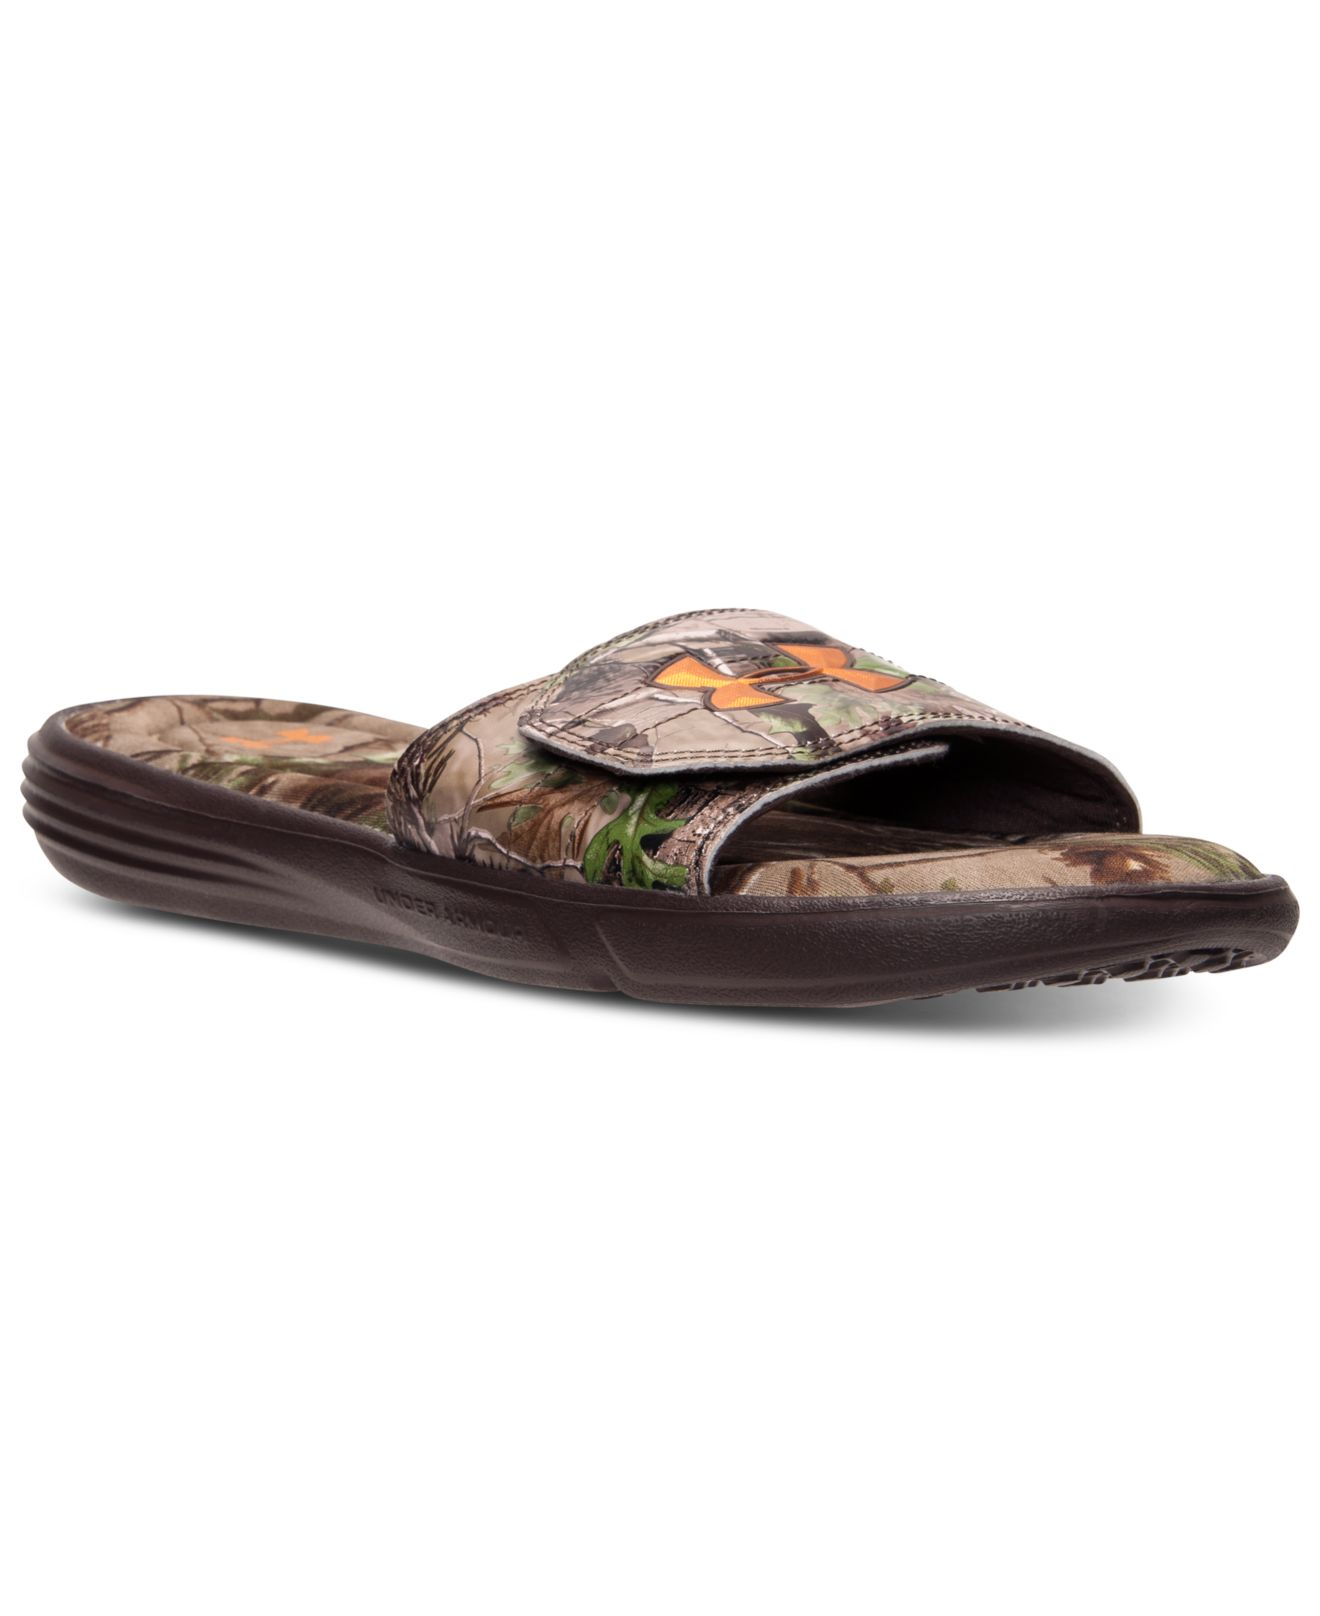 Under Armour Men's Ignite Iii Camo Slide Sandals From Finish Line for ...